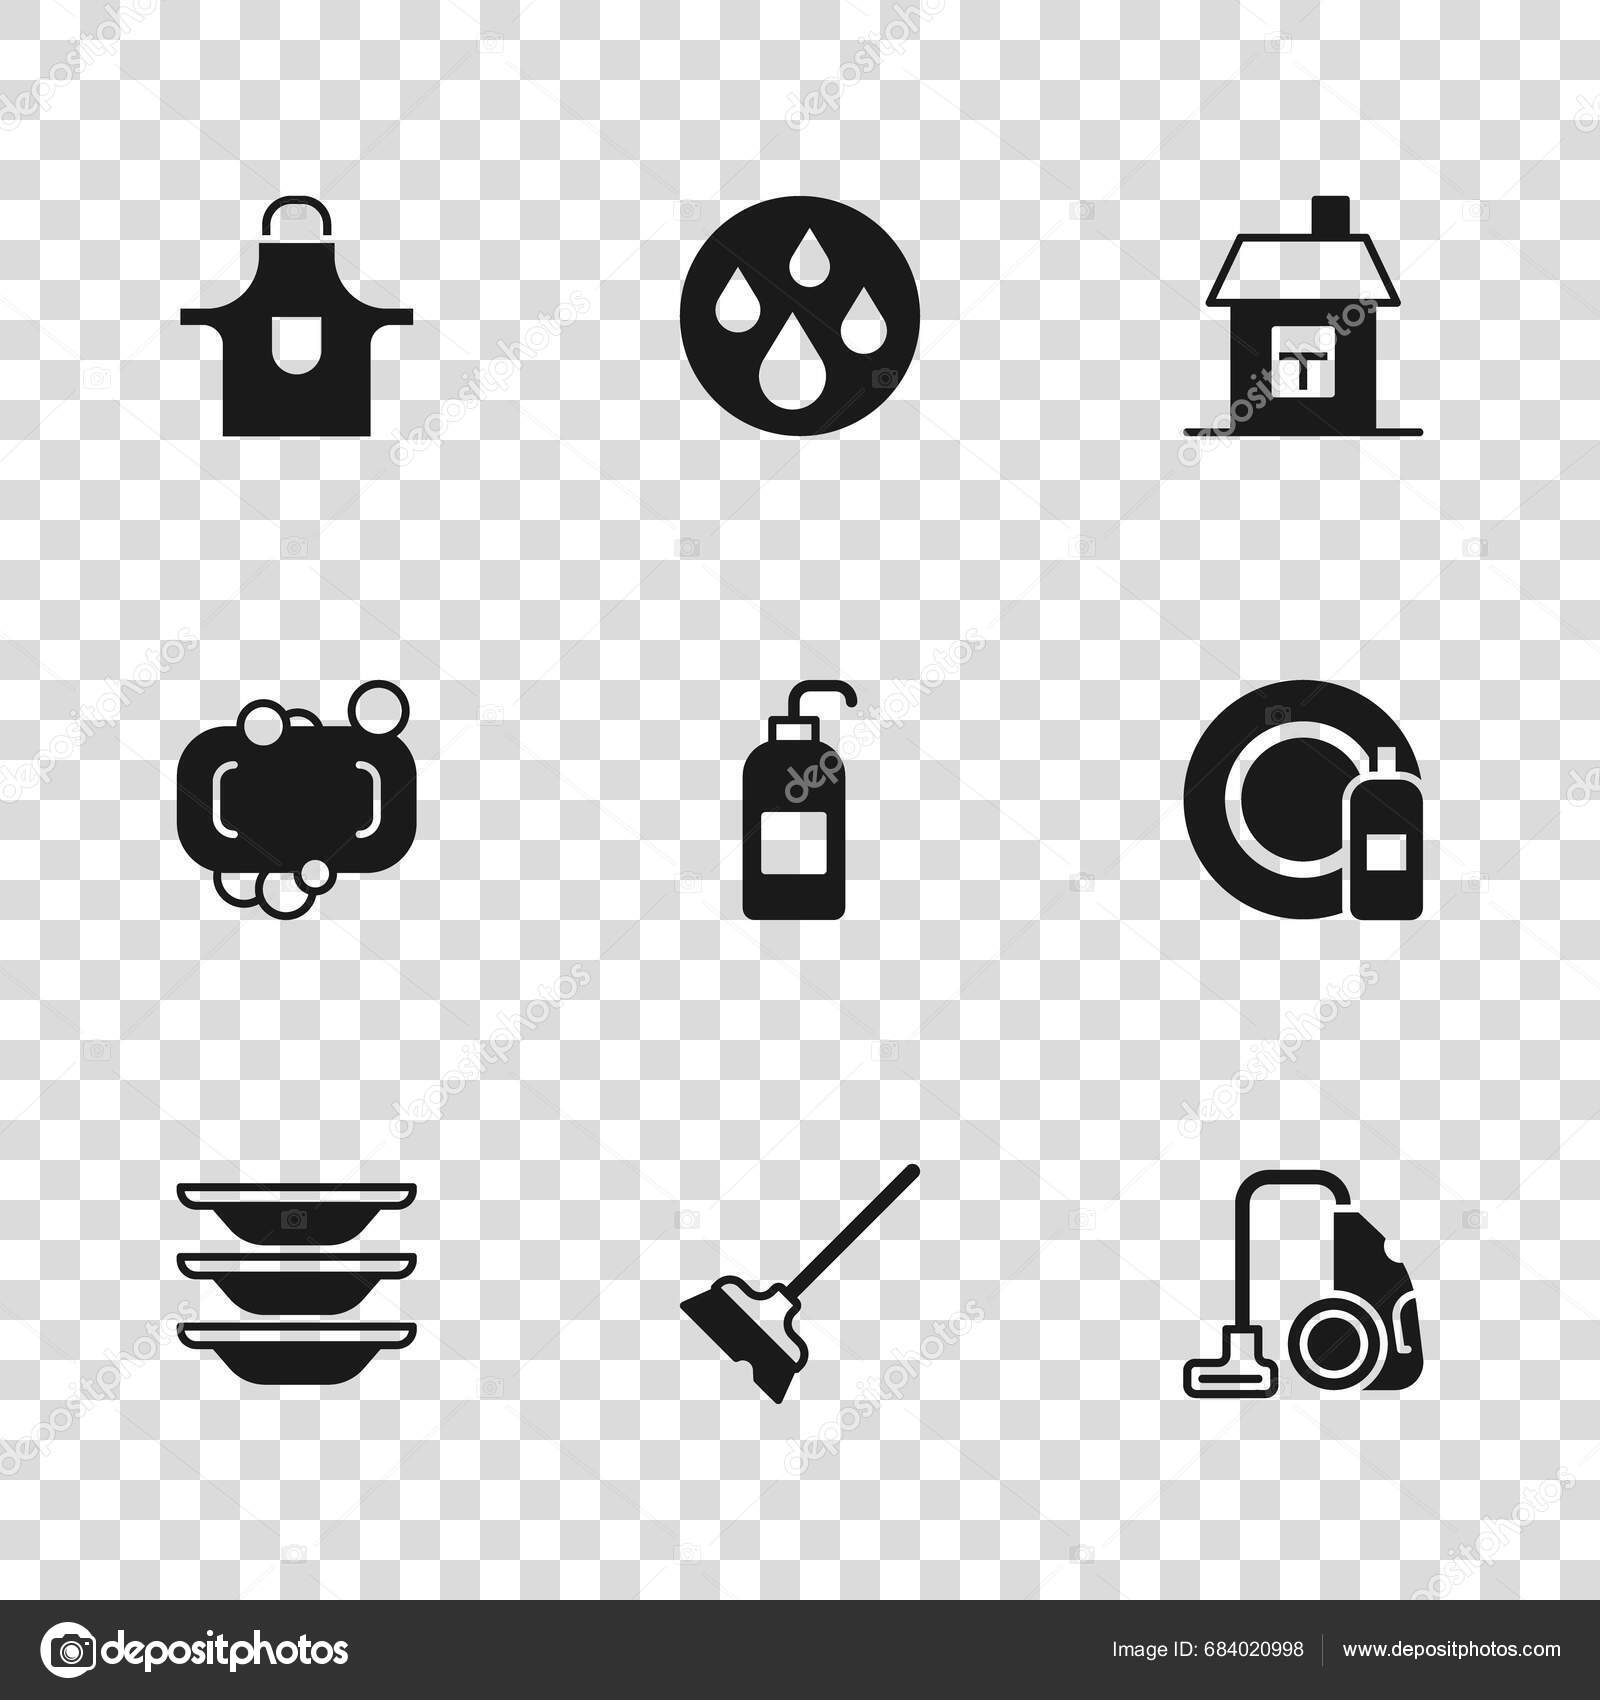 Utility objects Stock Photos, Royalty Free Utility objects Images